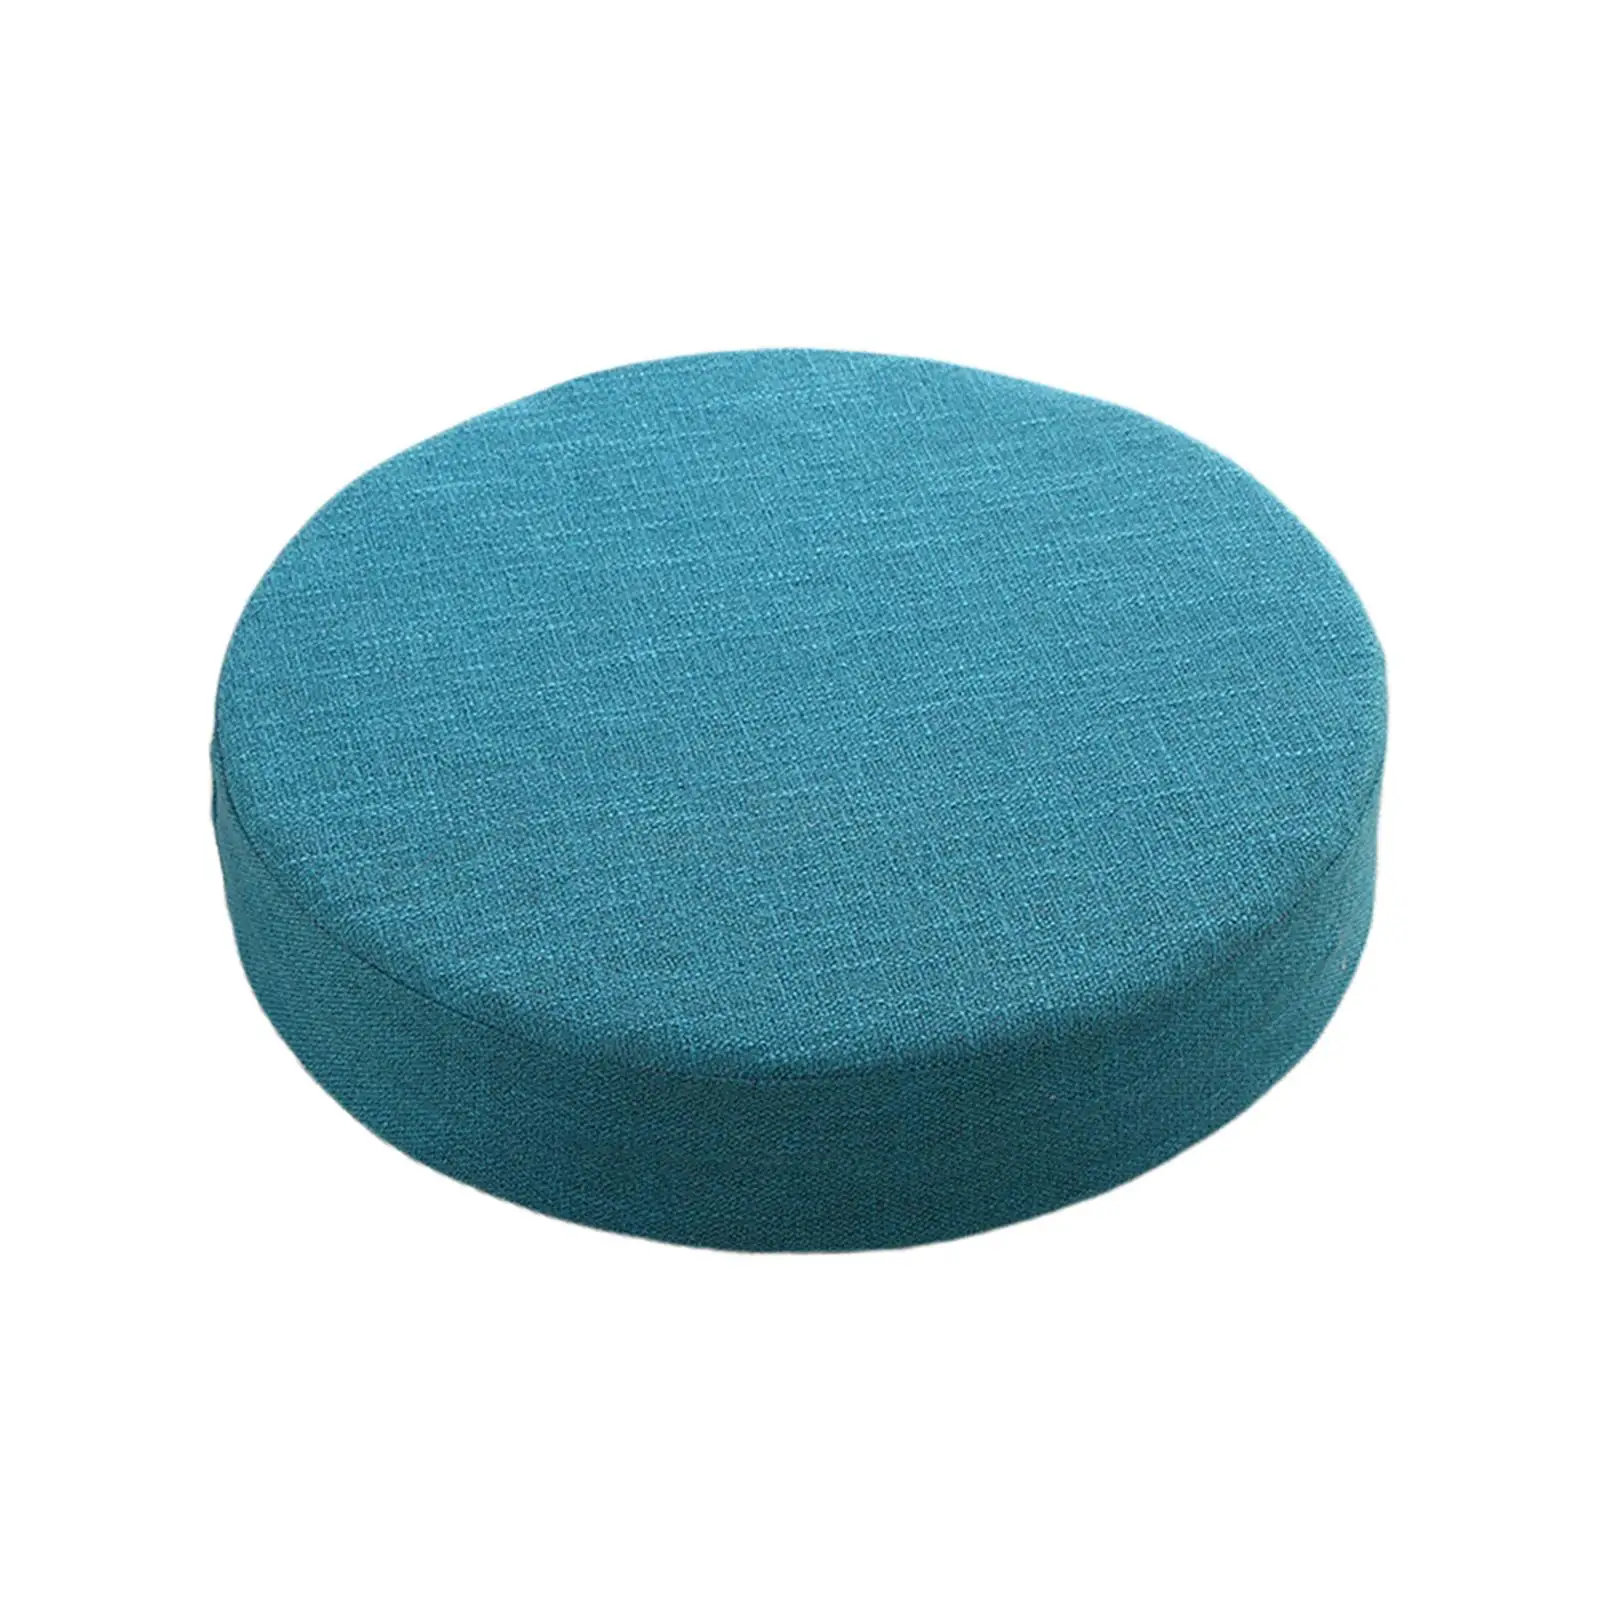 Pillow Cushions Meditation Round Japaness Tatami Floor Pillow Cushions for Outdoor